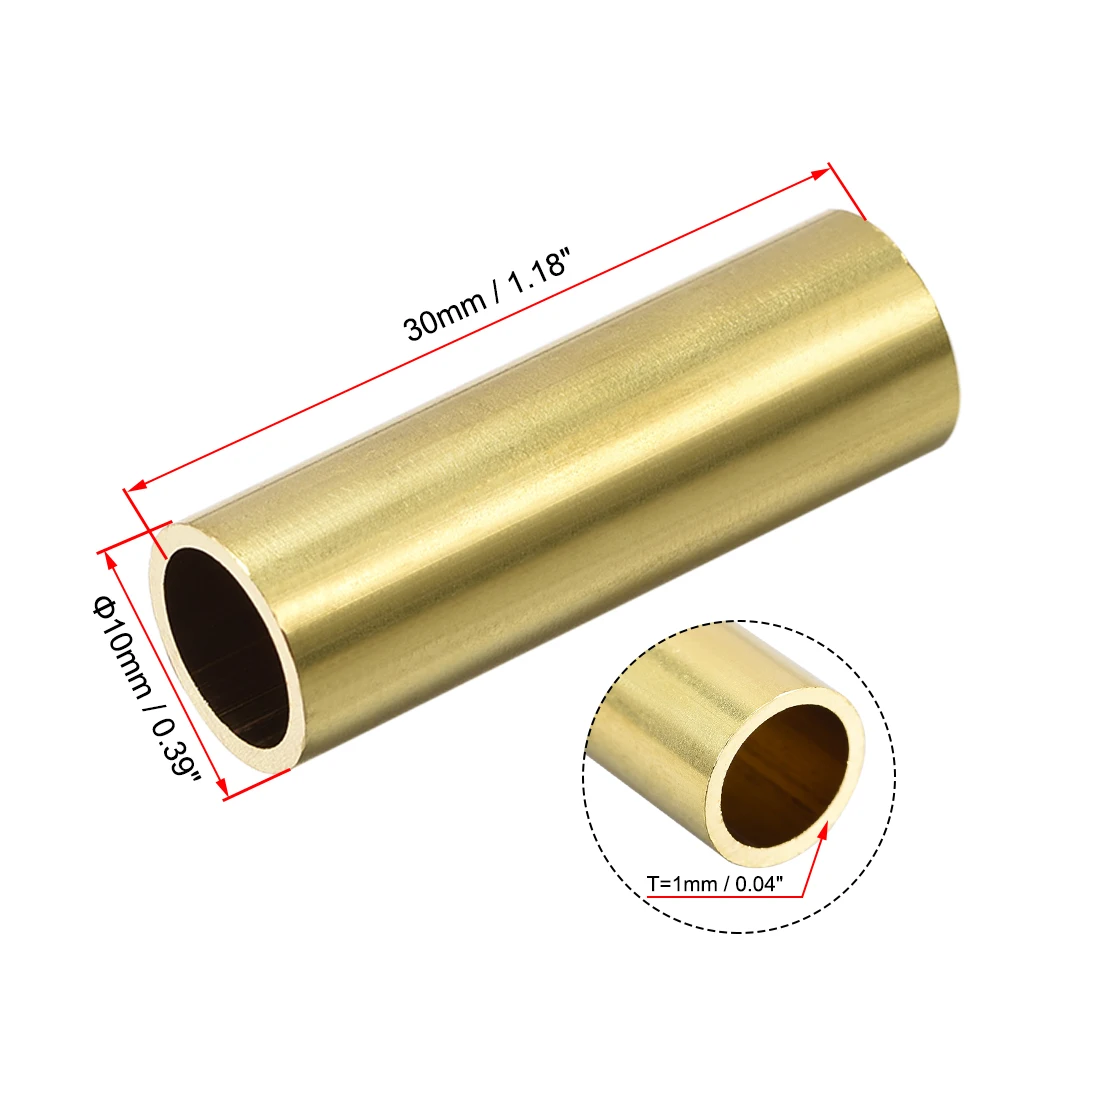 uxcell Brass Round Tube 8mm OD 1mm Wall Thickness 30mm Length Seamless Pipe Tubing for DIY Crafts 30 Pcs 